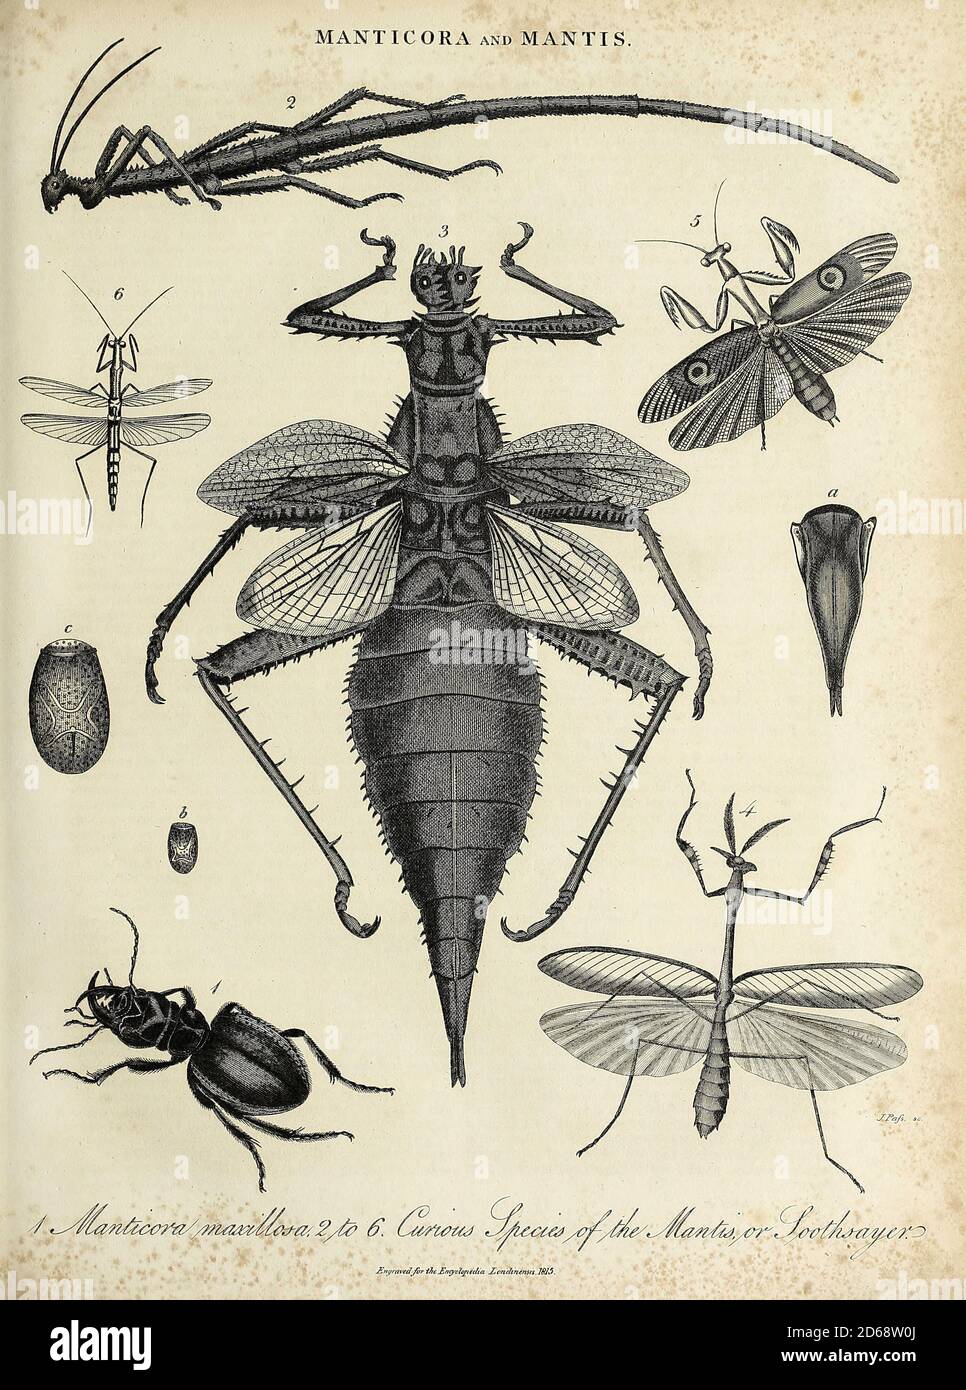 Manticora [tiger beetles] and Mantis Copperplate engraving From the Encyclopaedia Londinensis or, Universal dictionary of arts, sciences, and literature; Volume XIV;  Edited by Wilkes, John. Published in London in 1816 Stock Photo